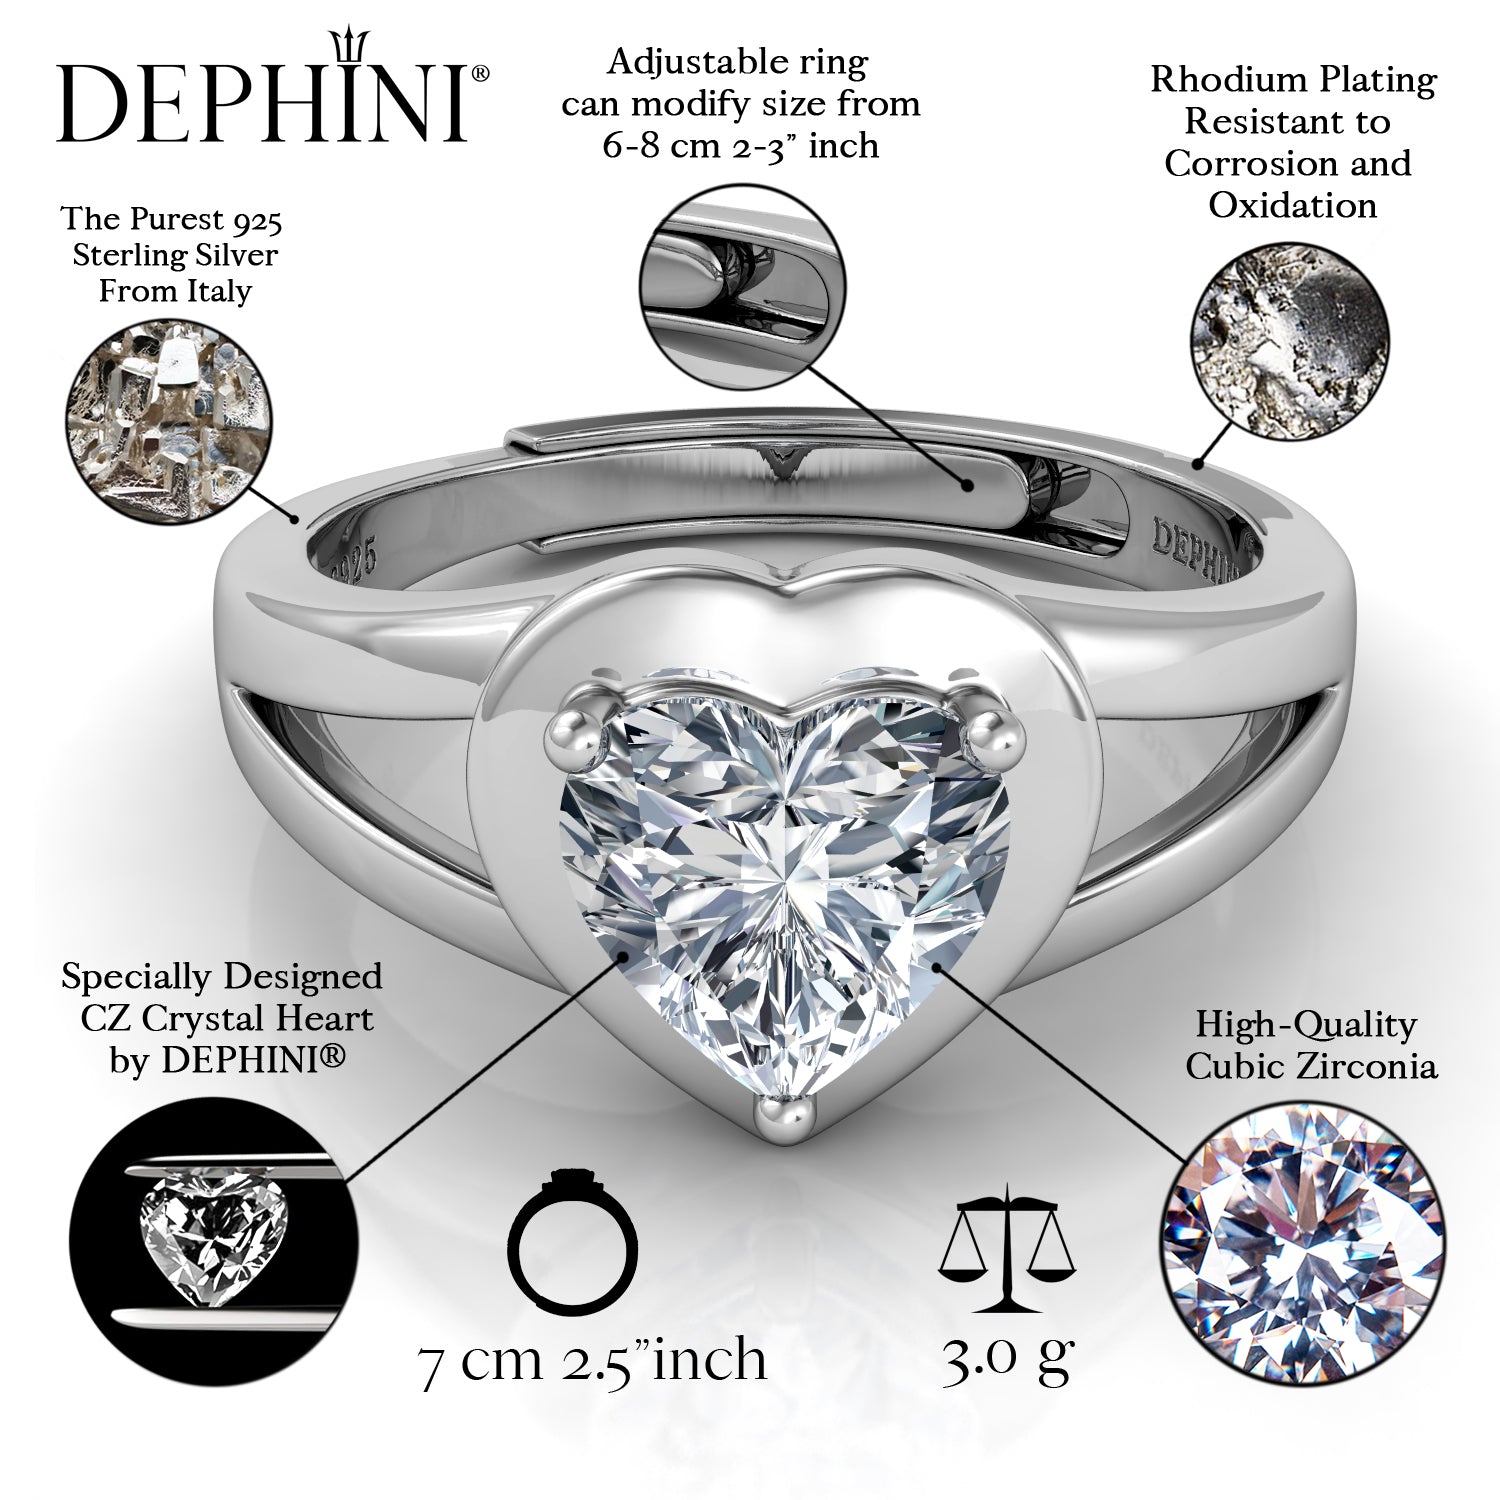 Ethereal Heart Ring (Silver) – SP Inc.